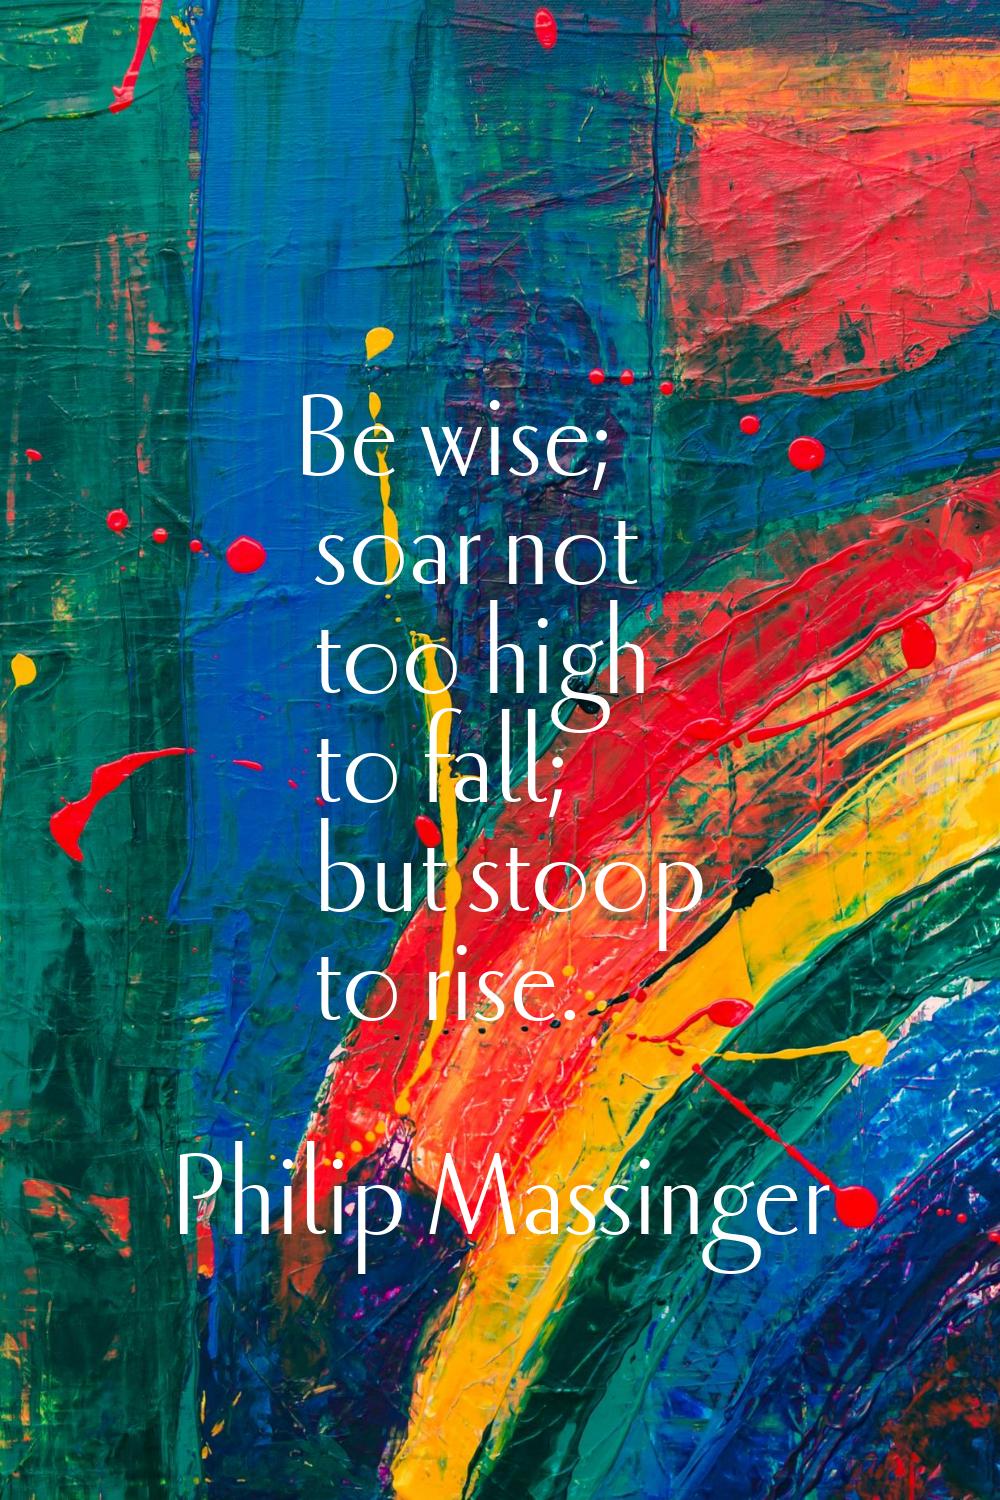 Be wise; soar not too high to fall; but stoop to rise.